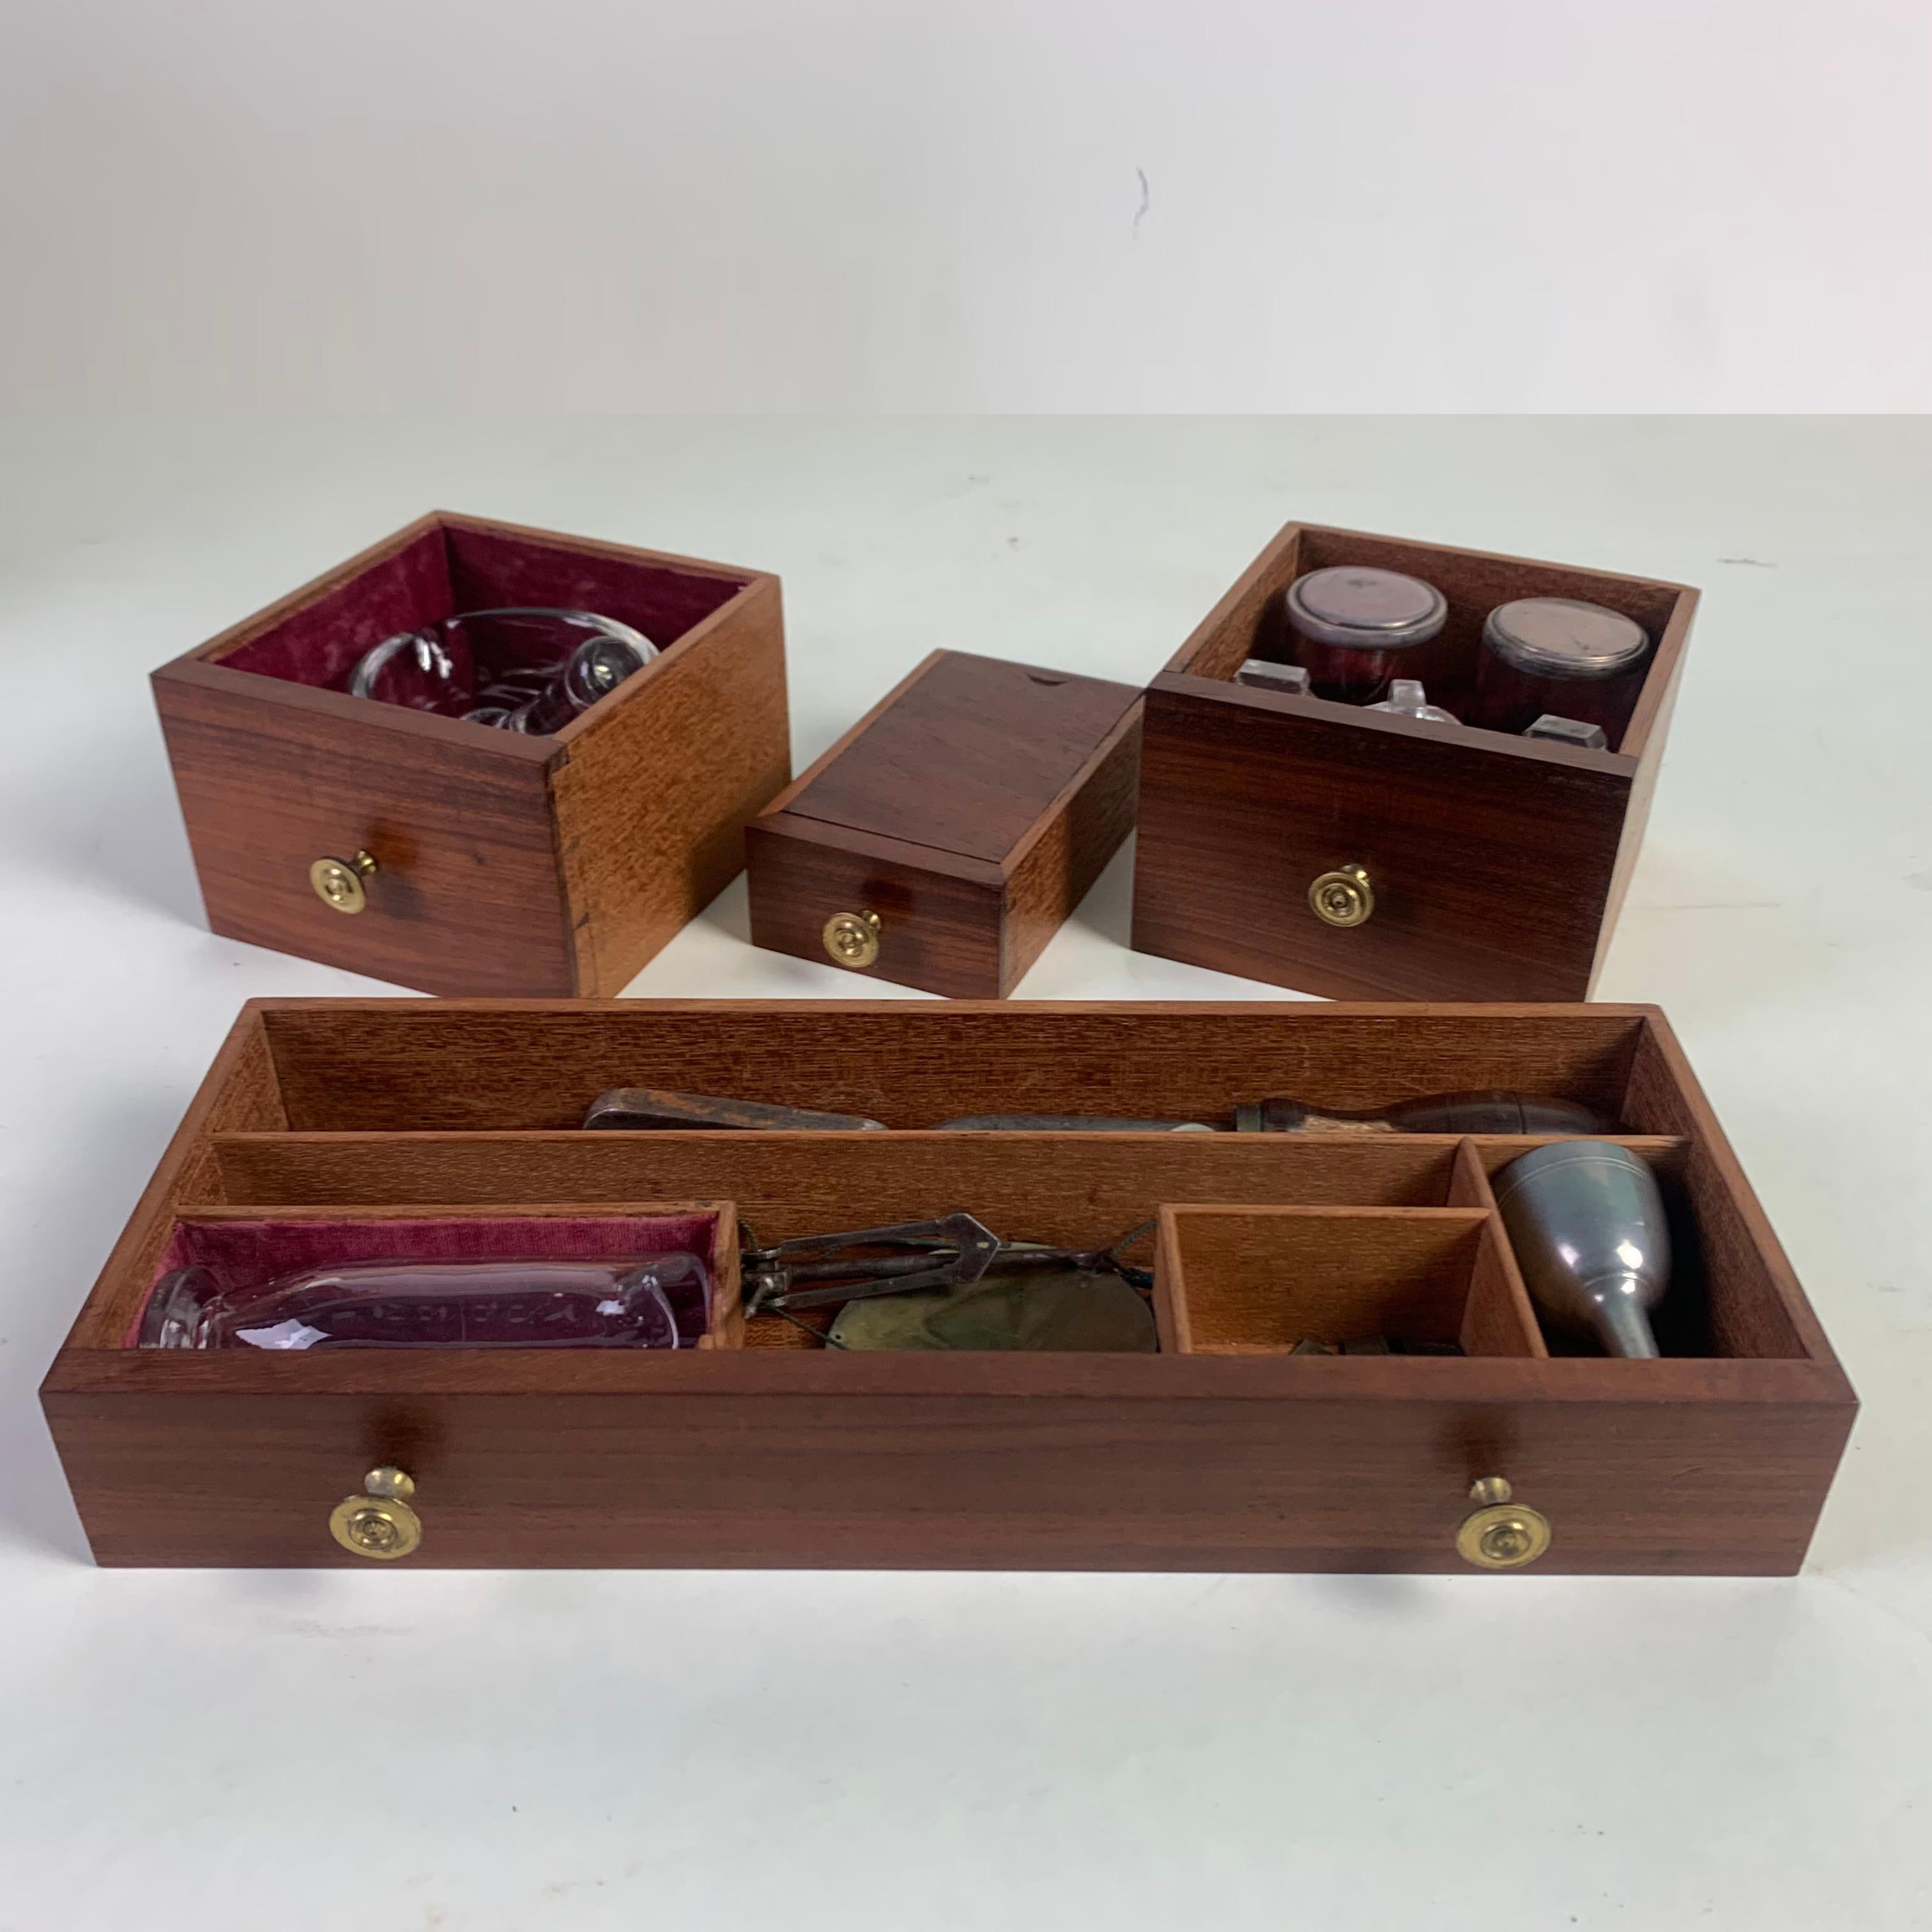 A facinating and rare early 19th century Doctor's Medecine box in very complte condition (with every single original and undamaged bottle and stopper). With a hidden secret compartmet at the rear for the more potent concoctions which is only